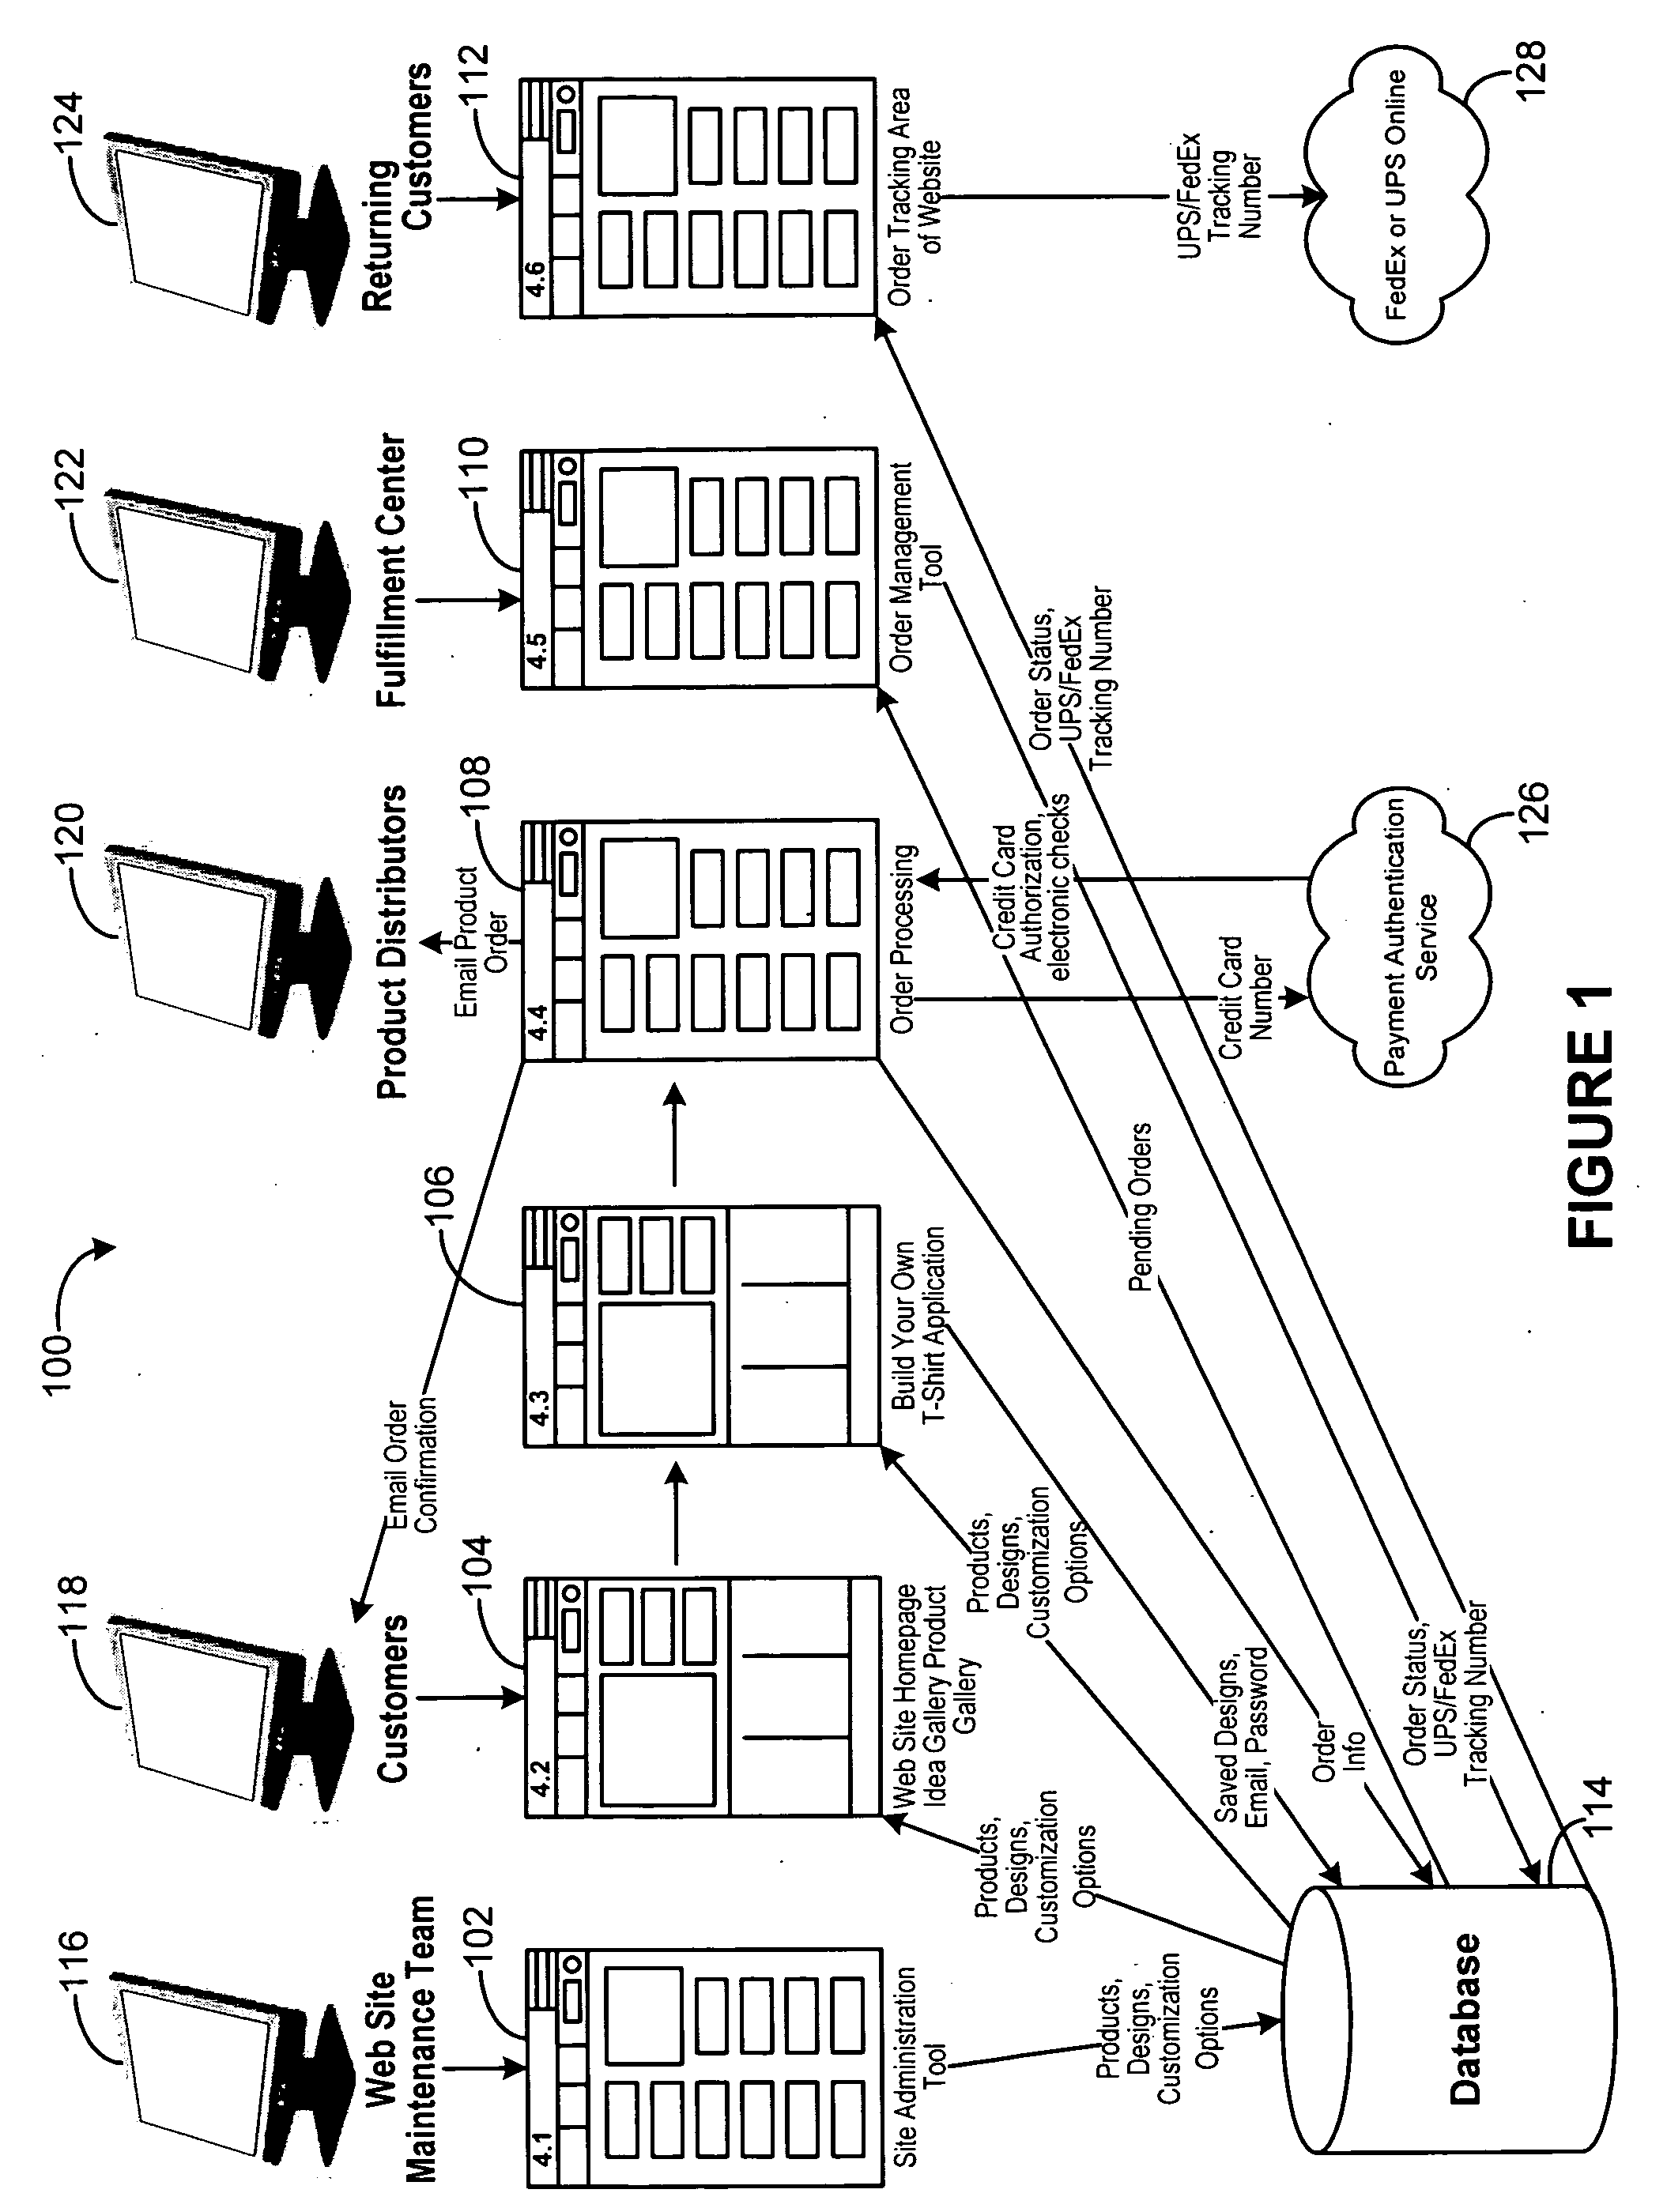 Method and system for customization of consumer products